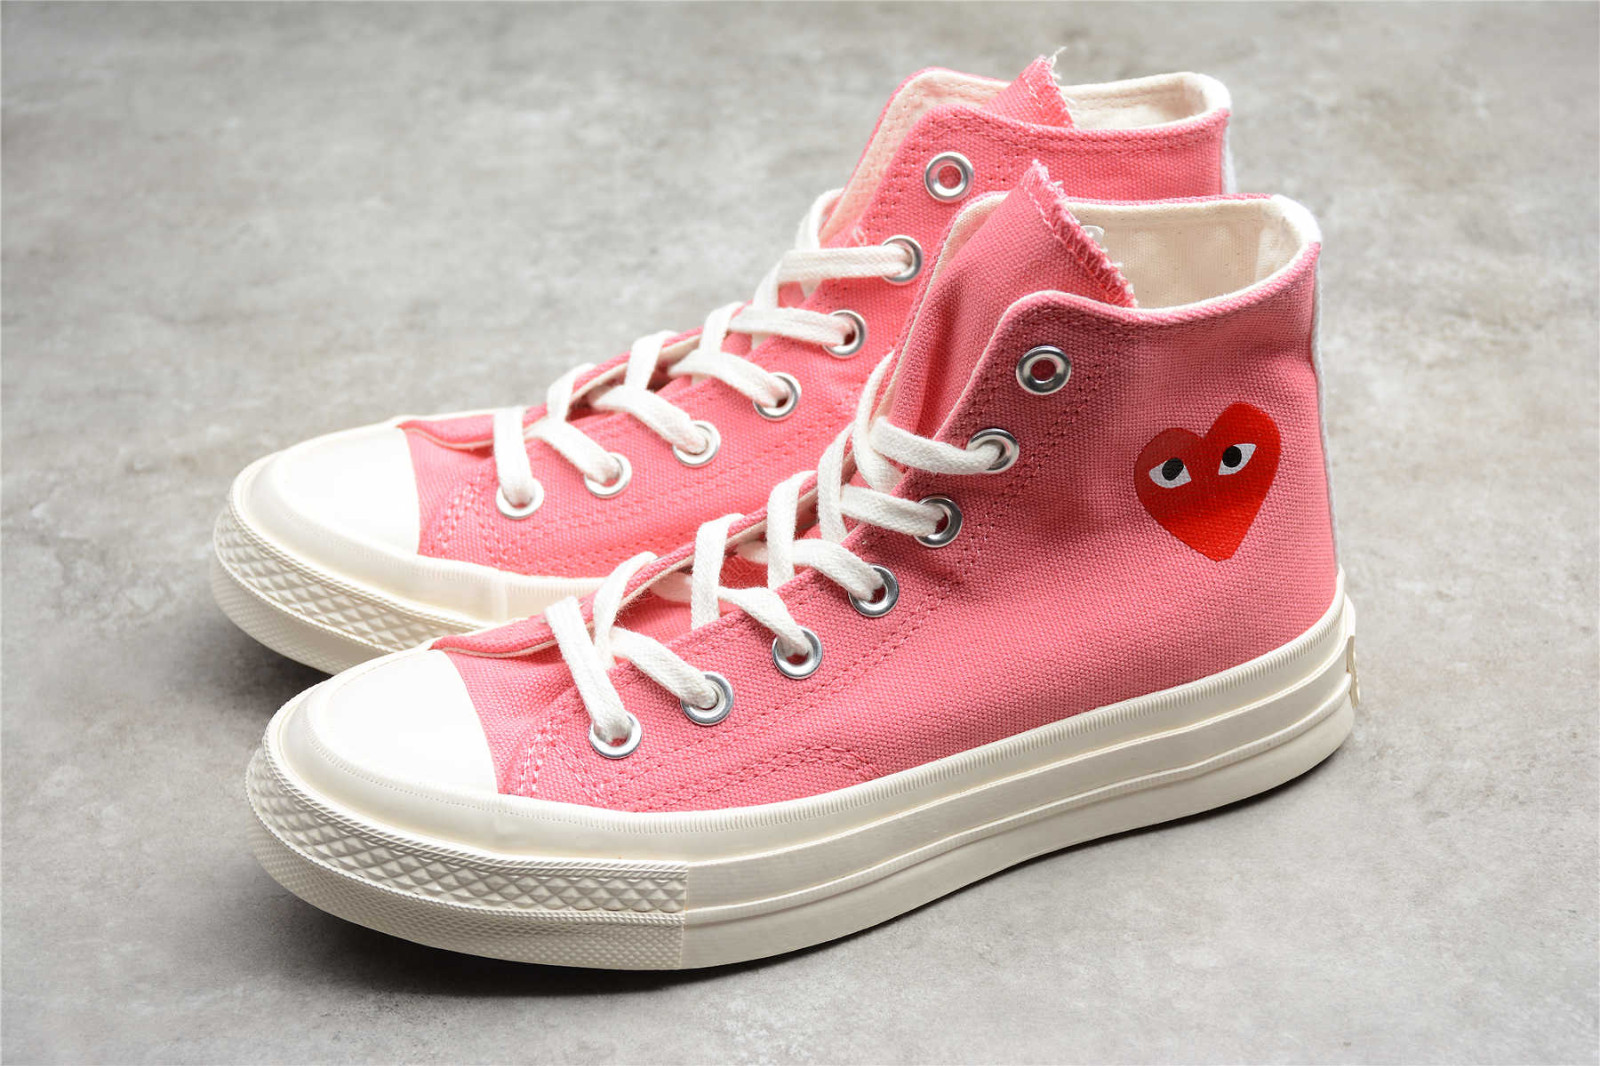 Comme des Garçons PLAY x NEIGHBORHOOD Converse Chuck Taylor All Star 70  High Bright Pink 168301C - StclaircomoShops - NEIGHBORHOOD Converse Japans  Timeline Collection is Period Correct